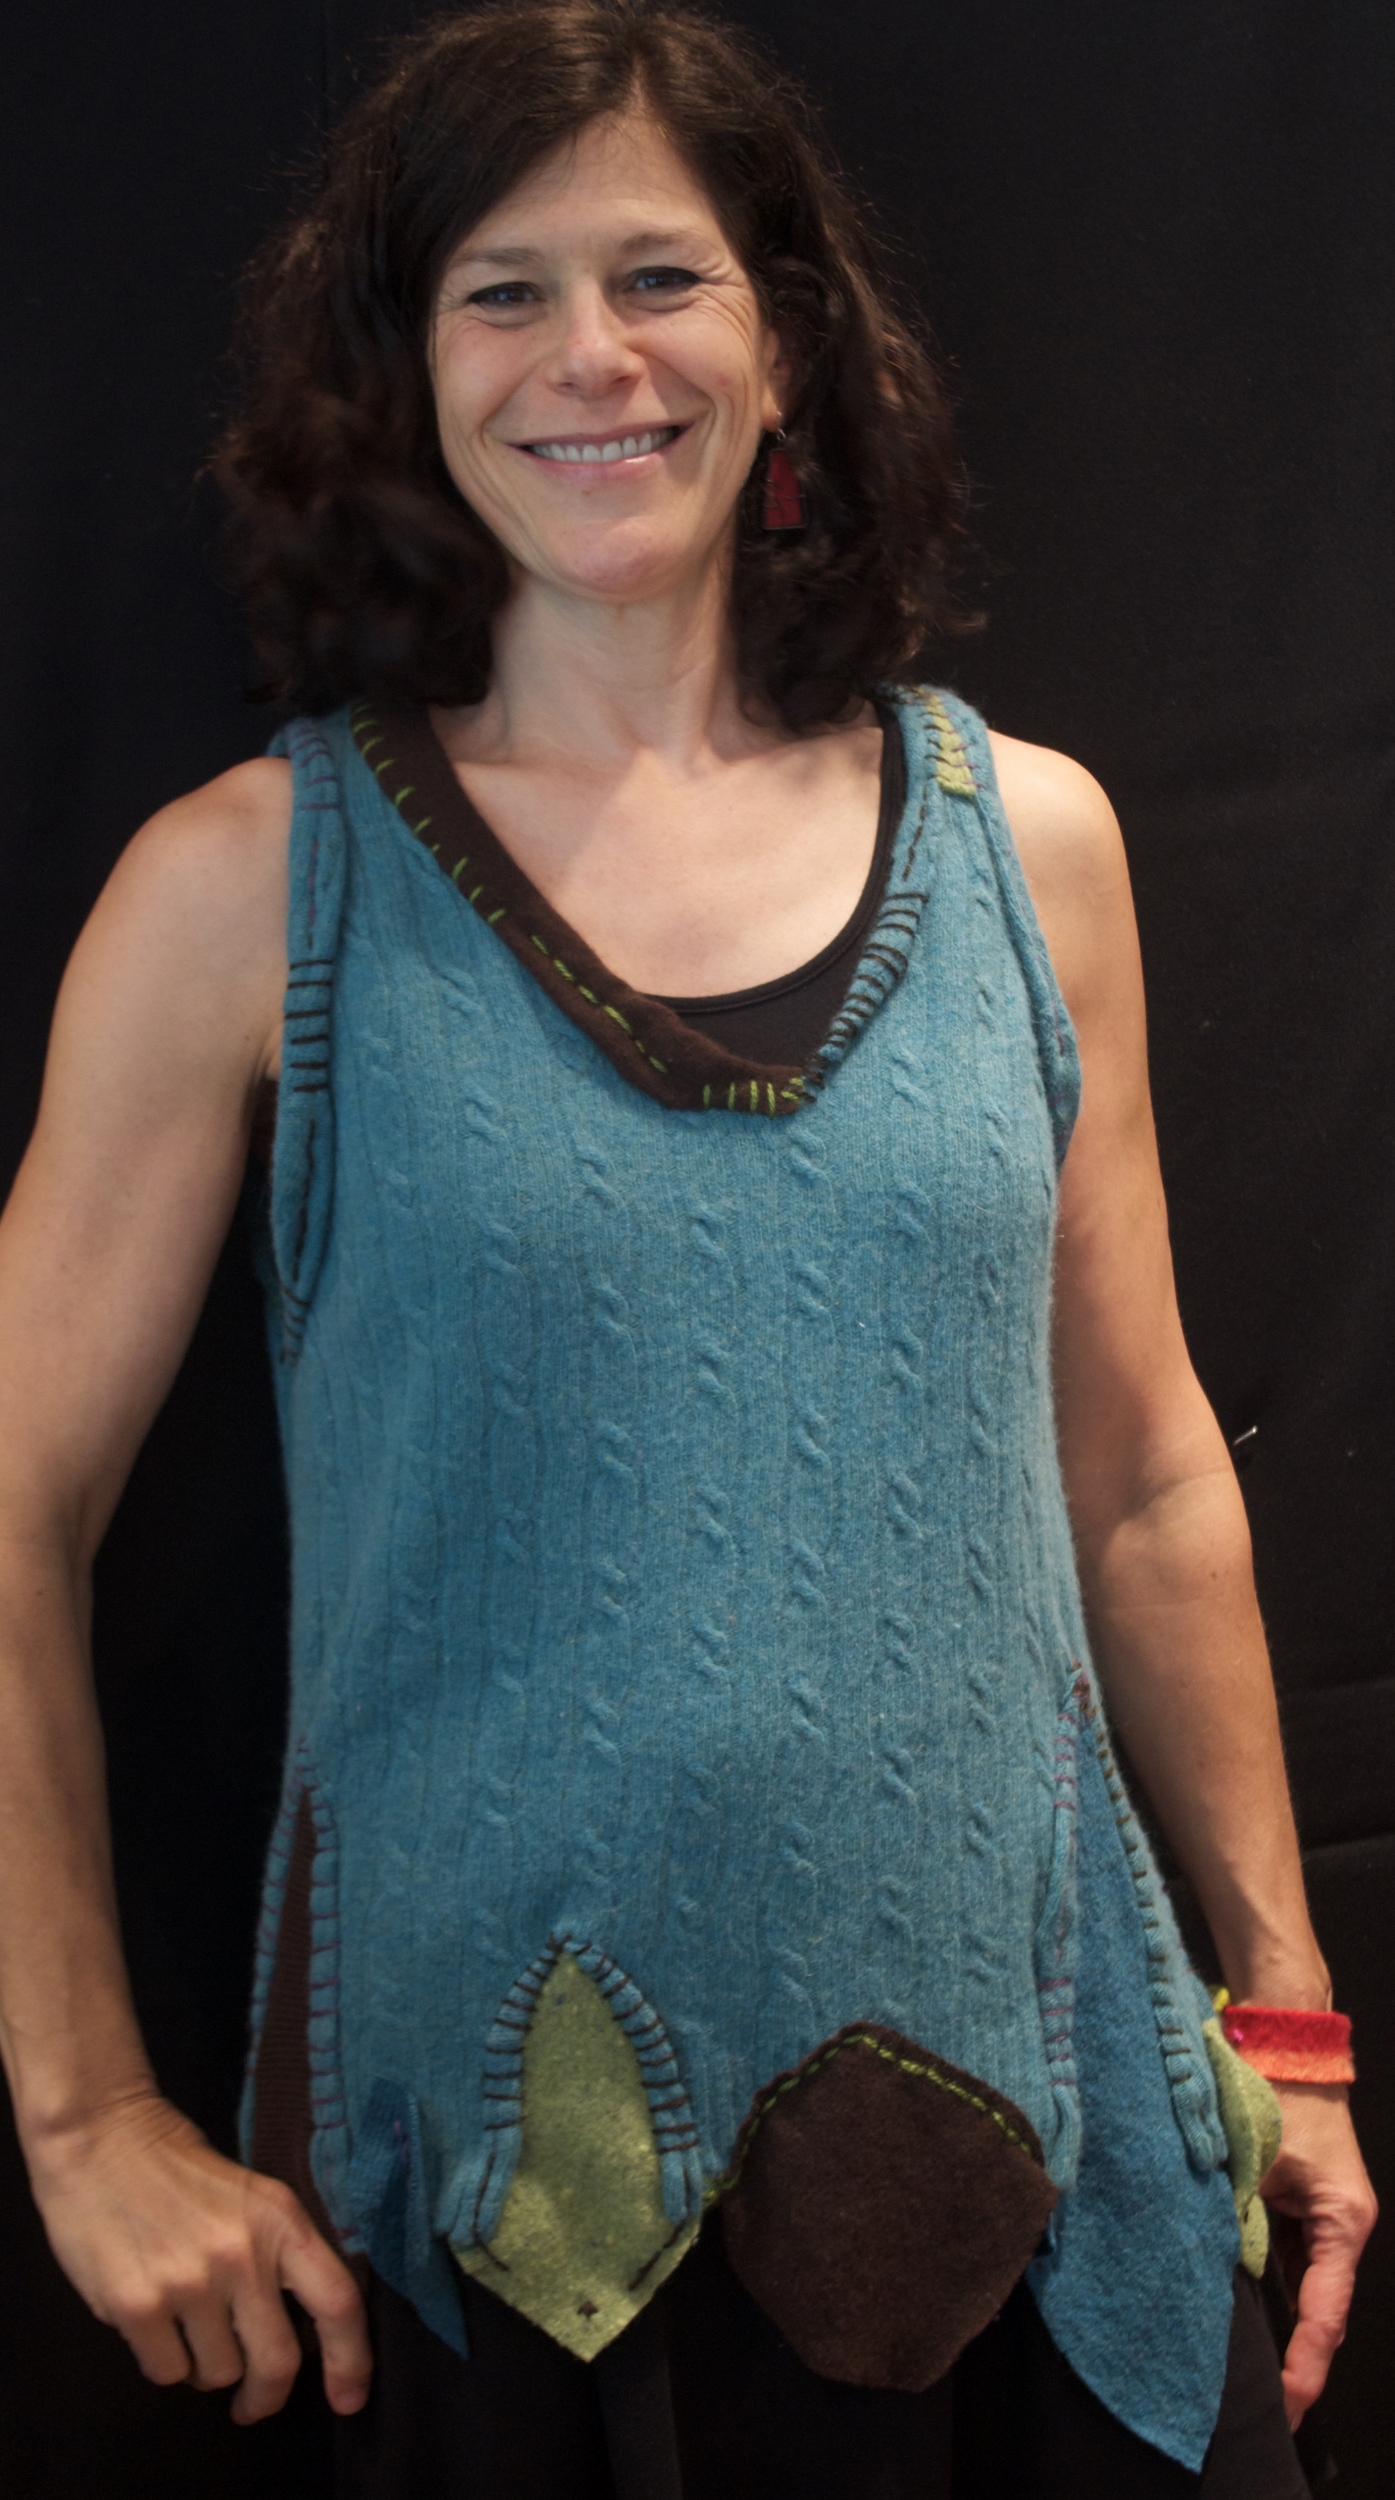 I am teaching an UPCYCLED SWEATER class at Living Arts Studio 6/9-7/14!!!